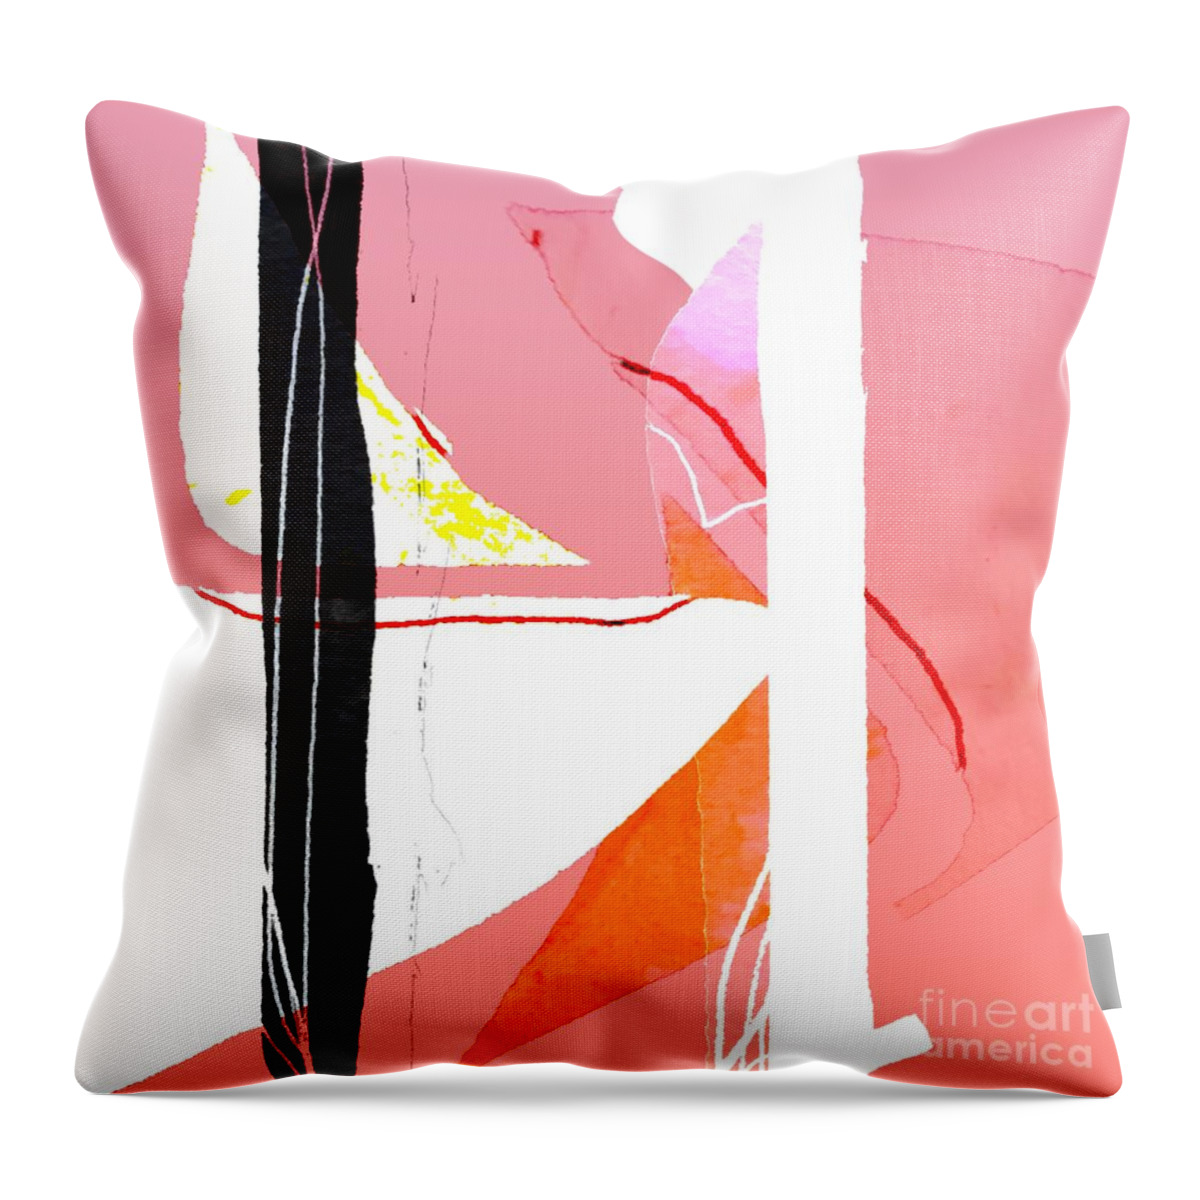 Contemporary Art Throw Pillow featuring the digital art Can you ask about my art practice, too? by Jeremiah Ray